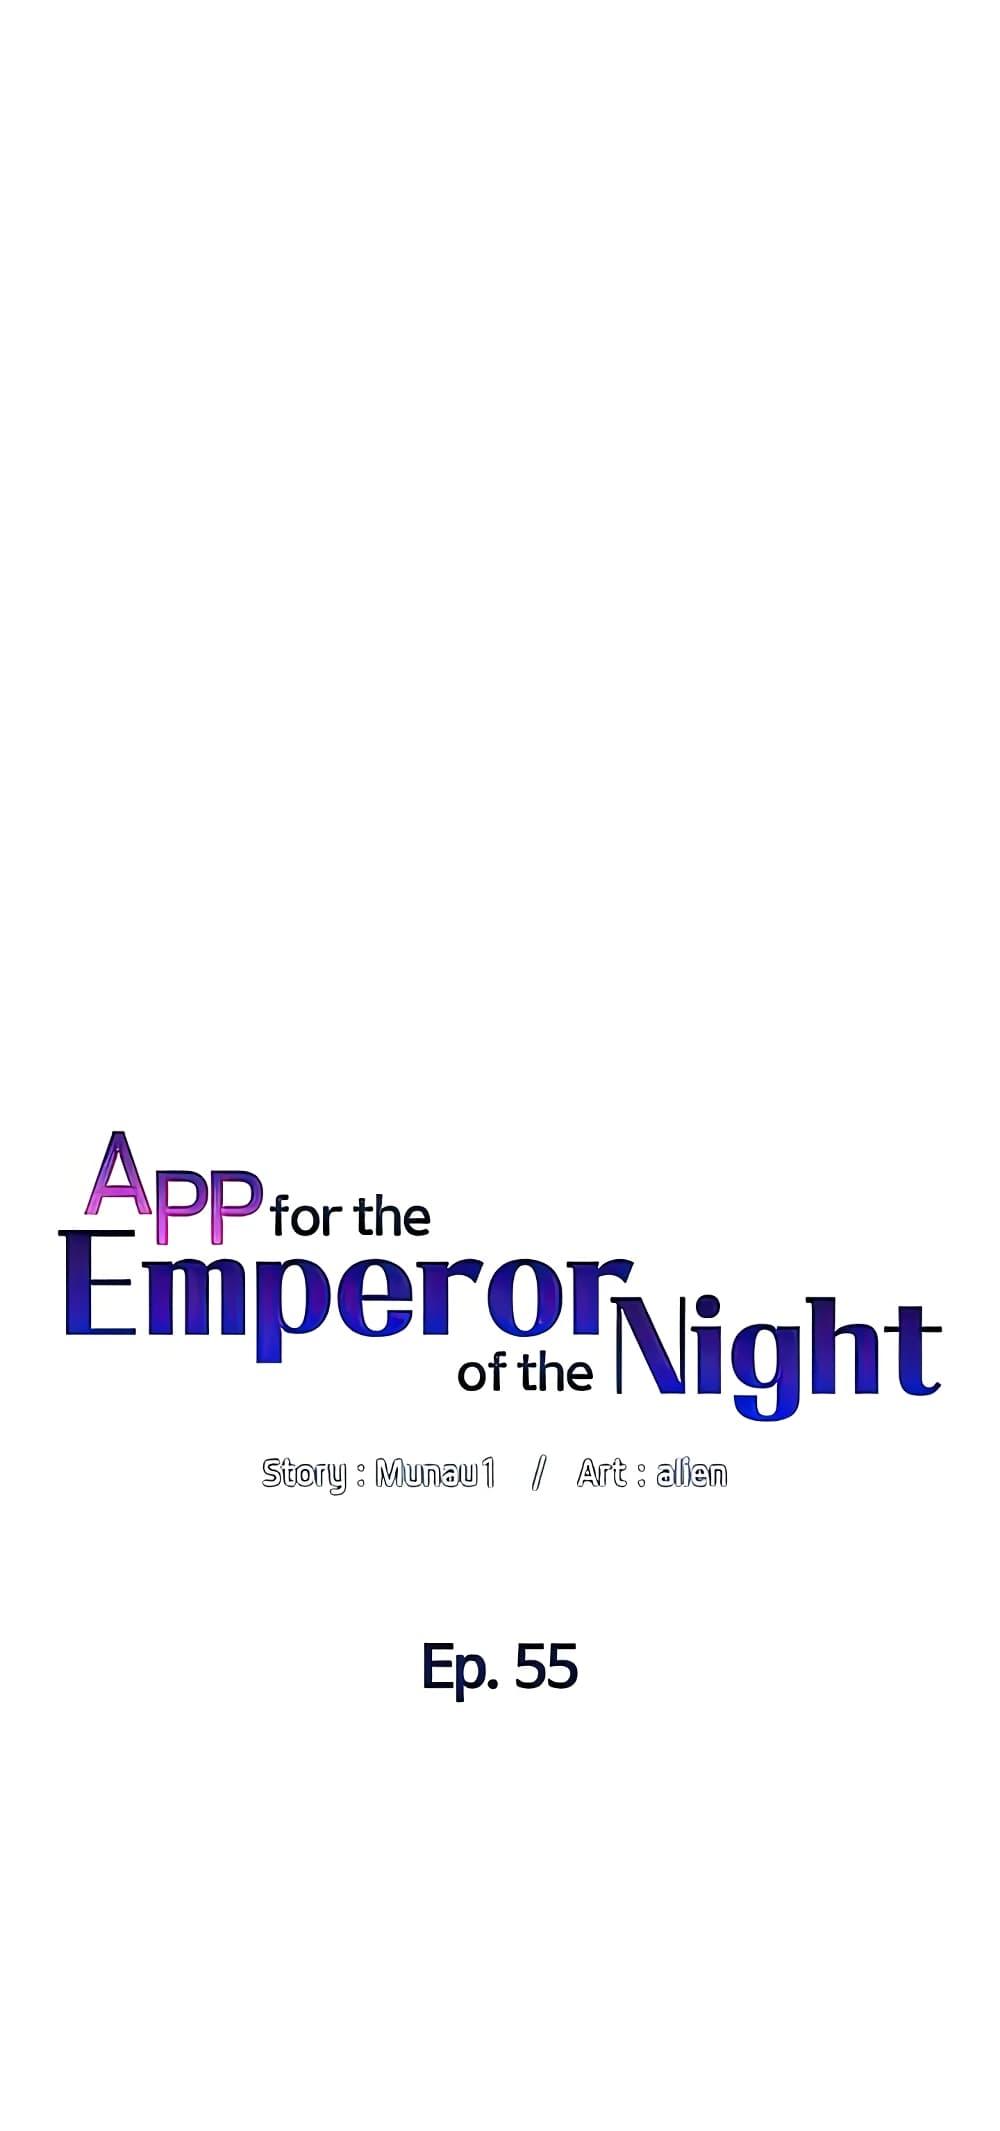 APP-for-the-Emperor-of-the-Night-55-9.jpg